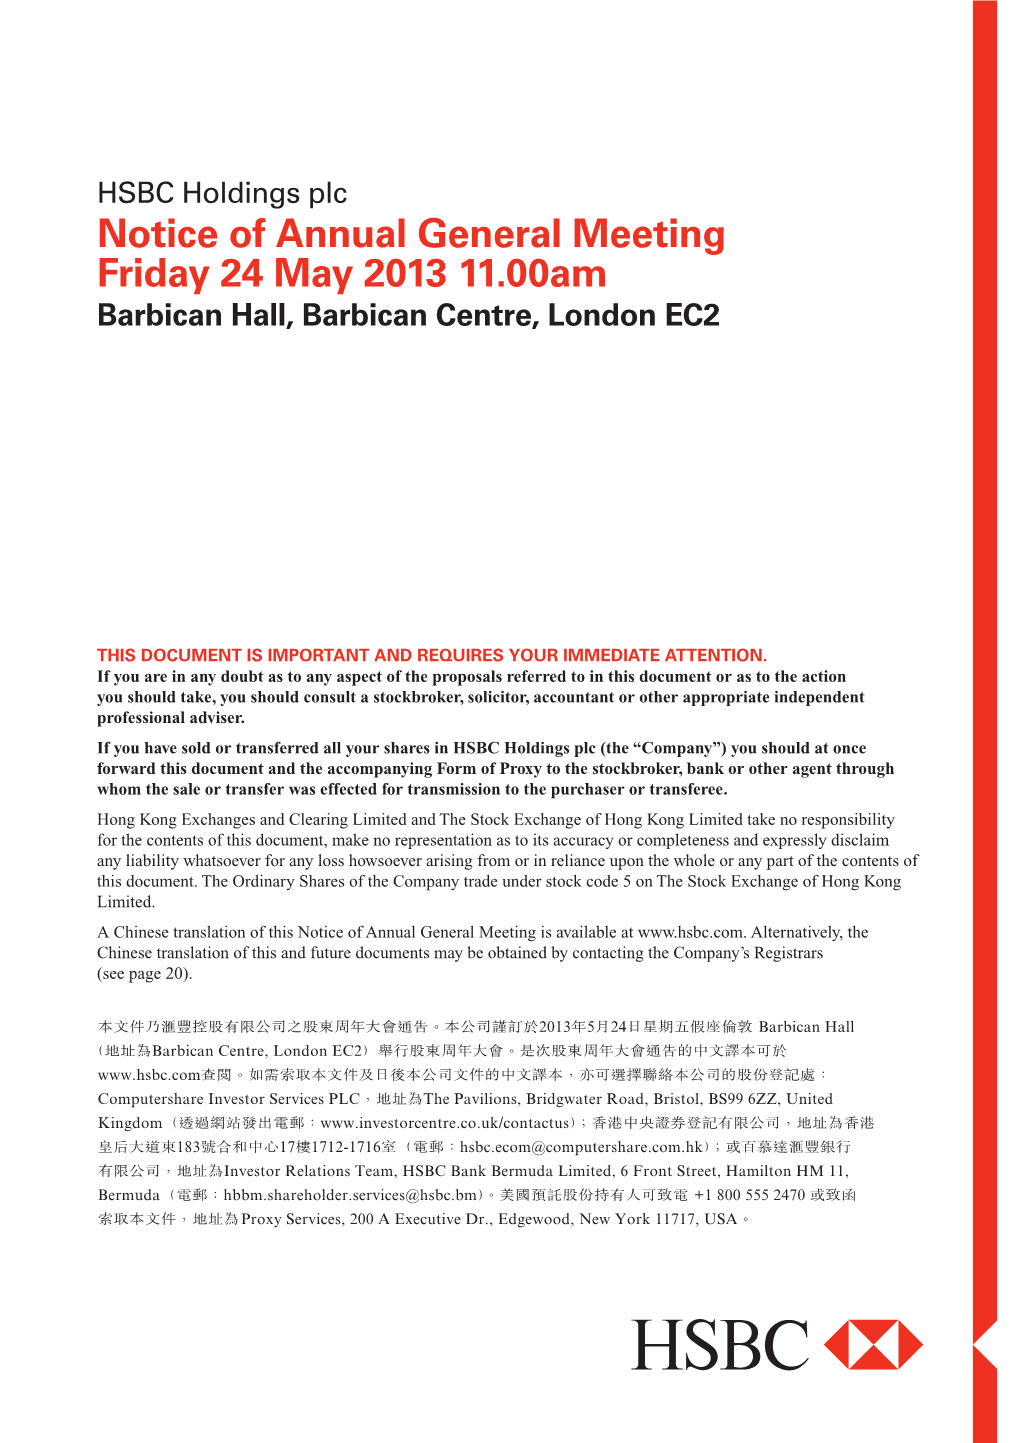 HSBC Holdings Plc Notice of Annual General Meeting 2013